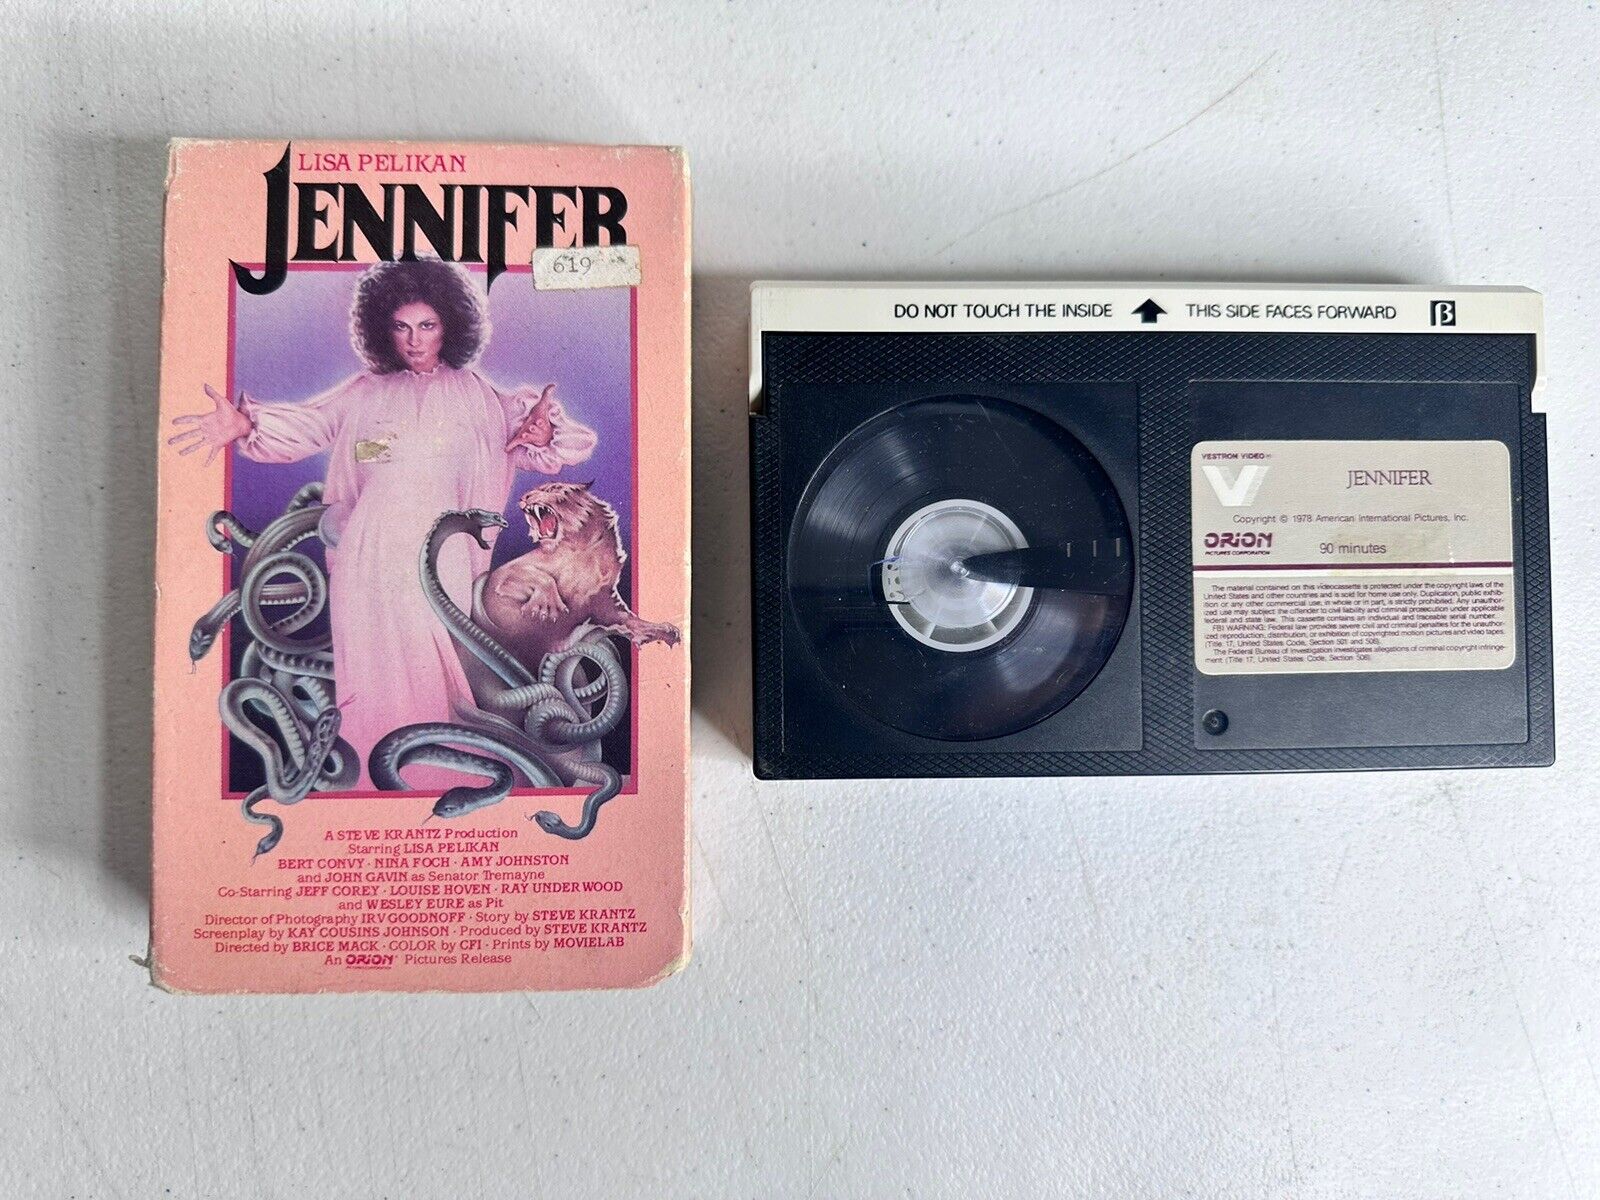 Vintage 1978 Jennifer Betamax Tape - Rare Horror Collectible Featuring Lisa Pelikan | Orion Pictures Release - TreasuTiques